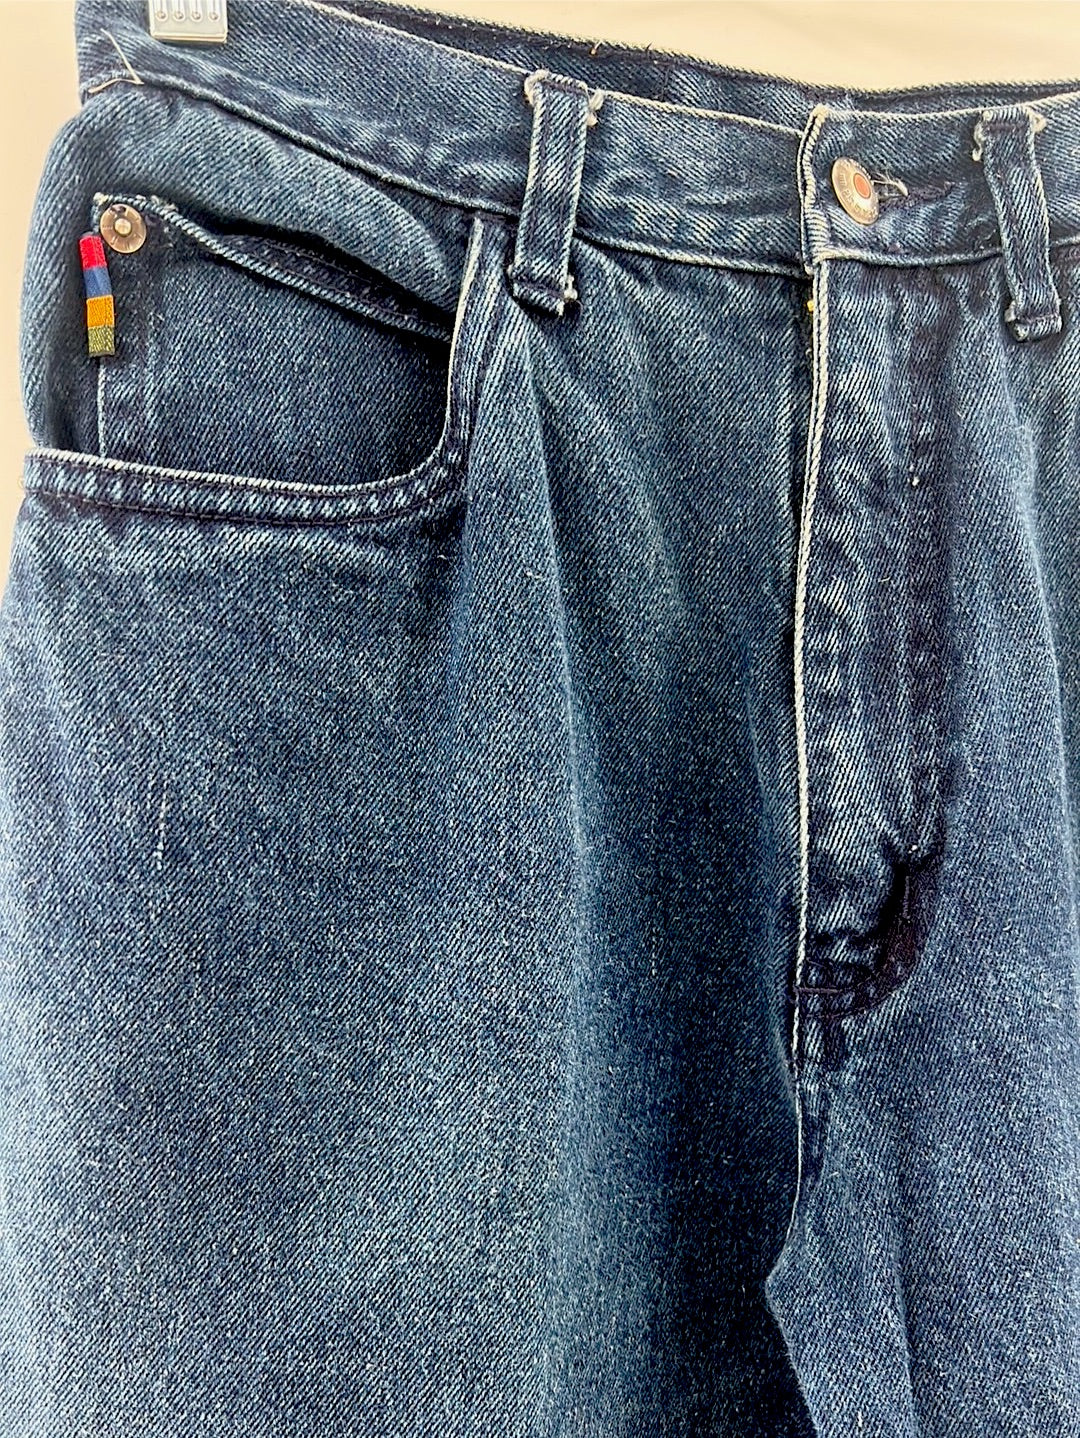 P S. Gitano 80's Blue Jeans (Size 10) – The Thrifty Hippy